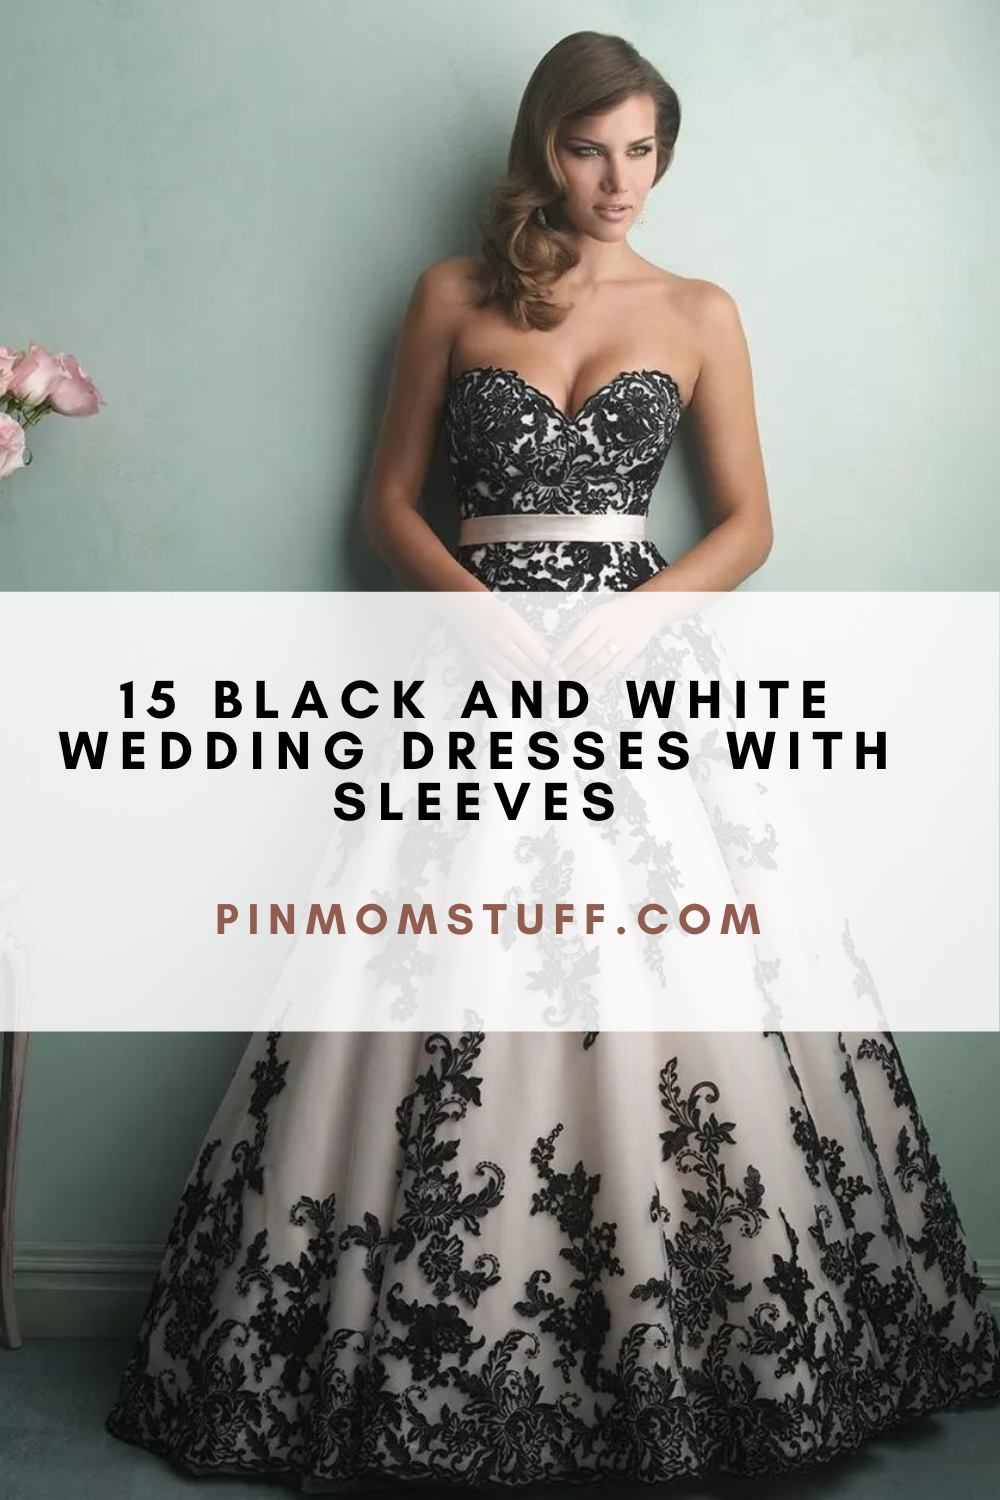 15 Black And White Wedding Dresses With Sleeves